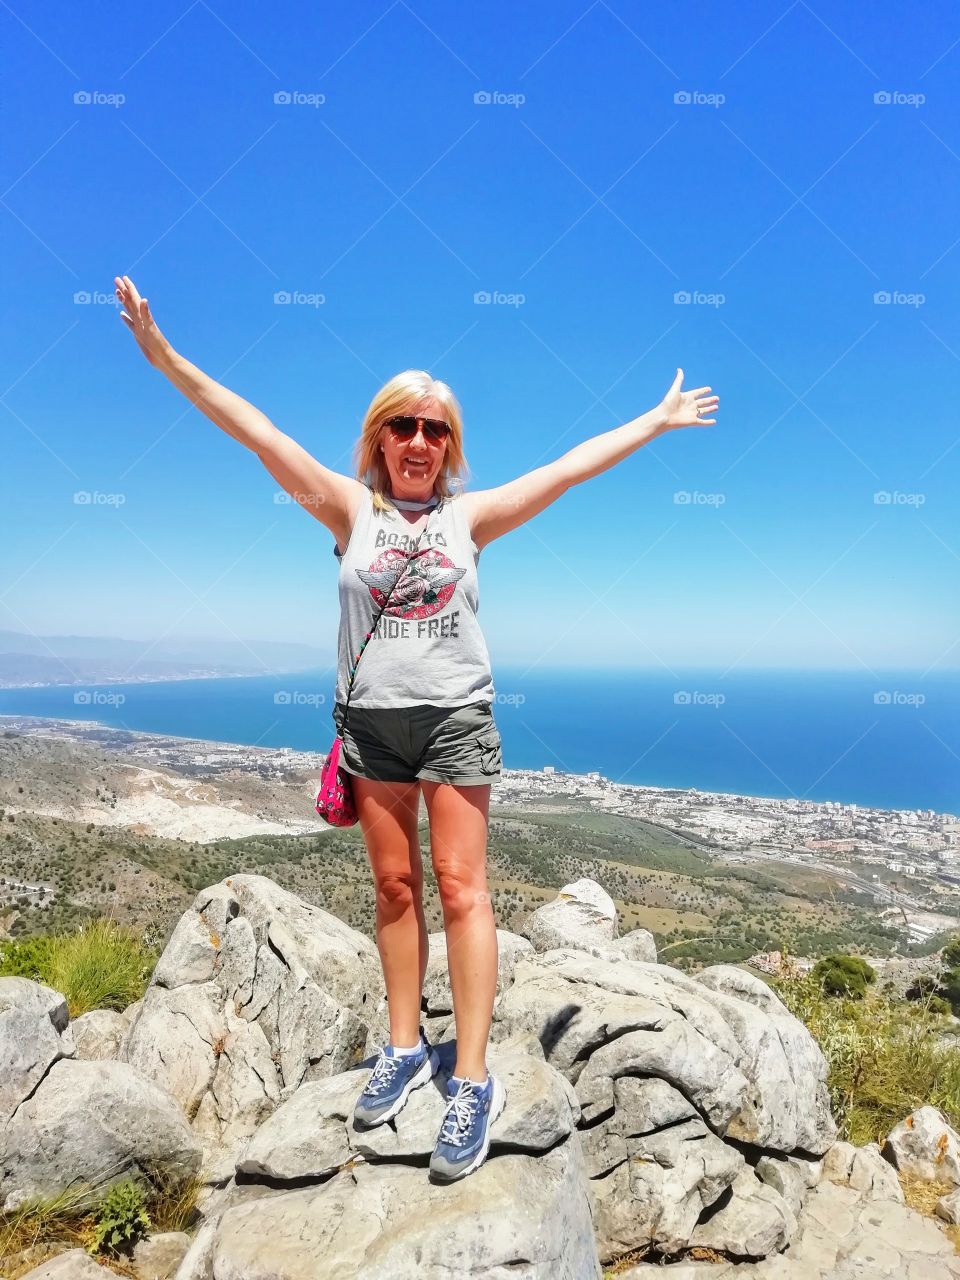 beautiful blonde female in shorts and t shirt standing on rocks over looking
Benalmádena spain